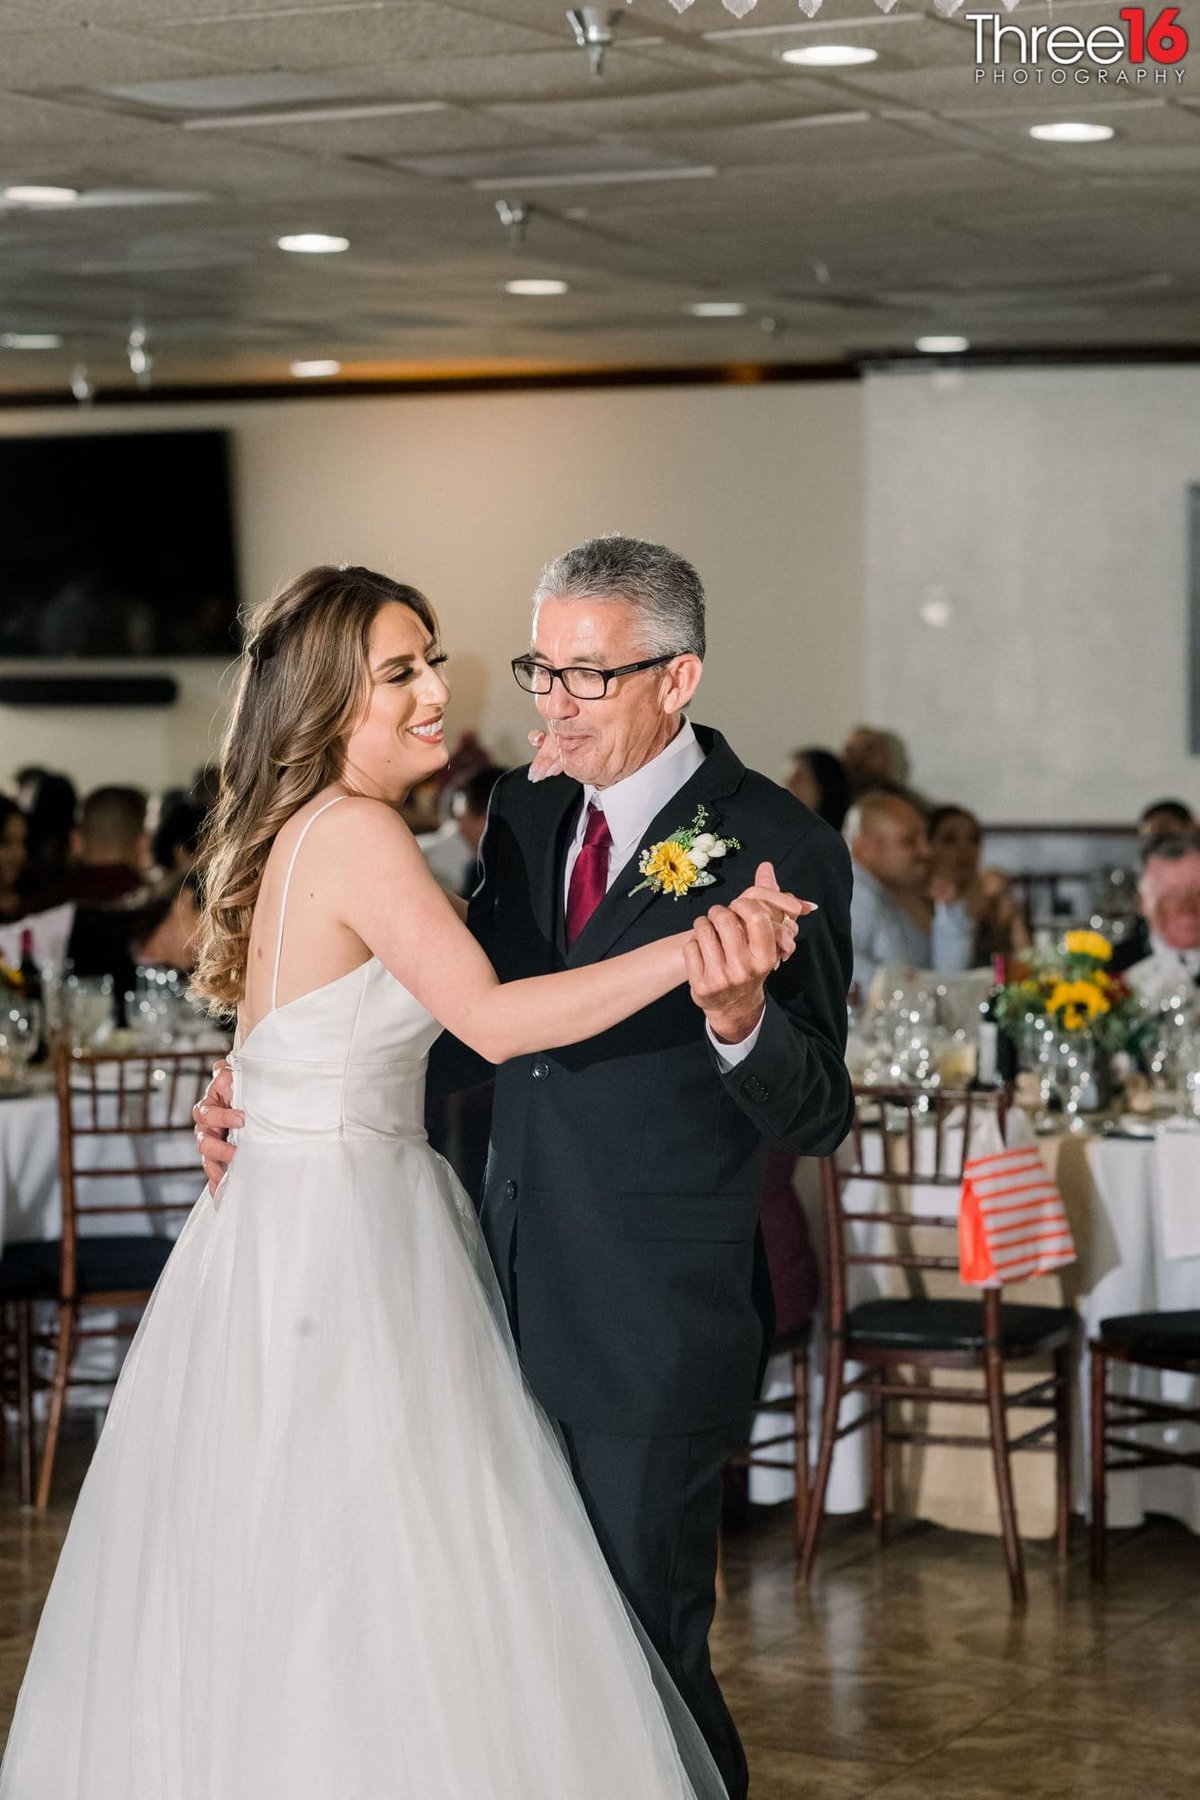 Father Daughter Dance at her wedding reception